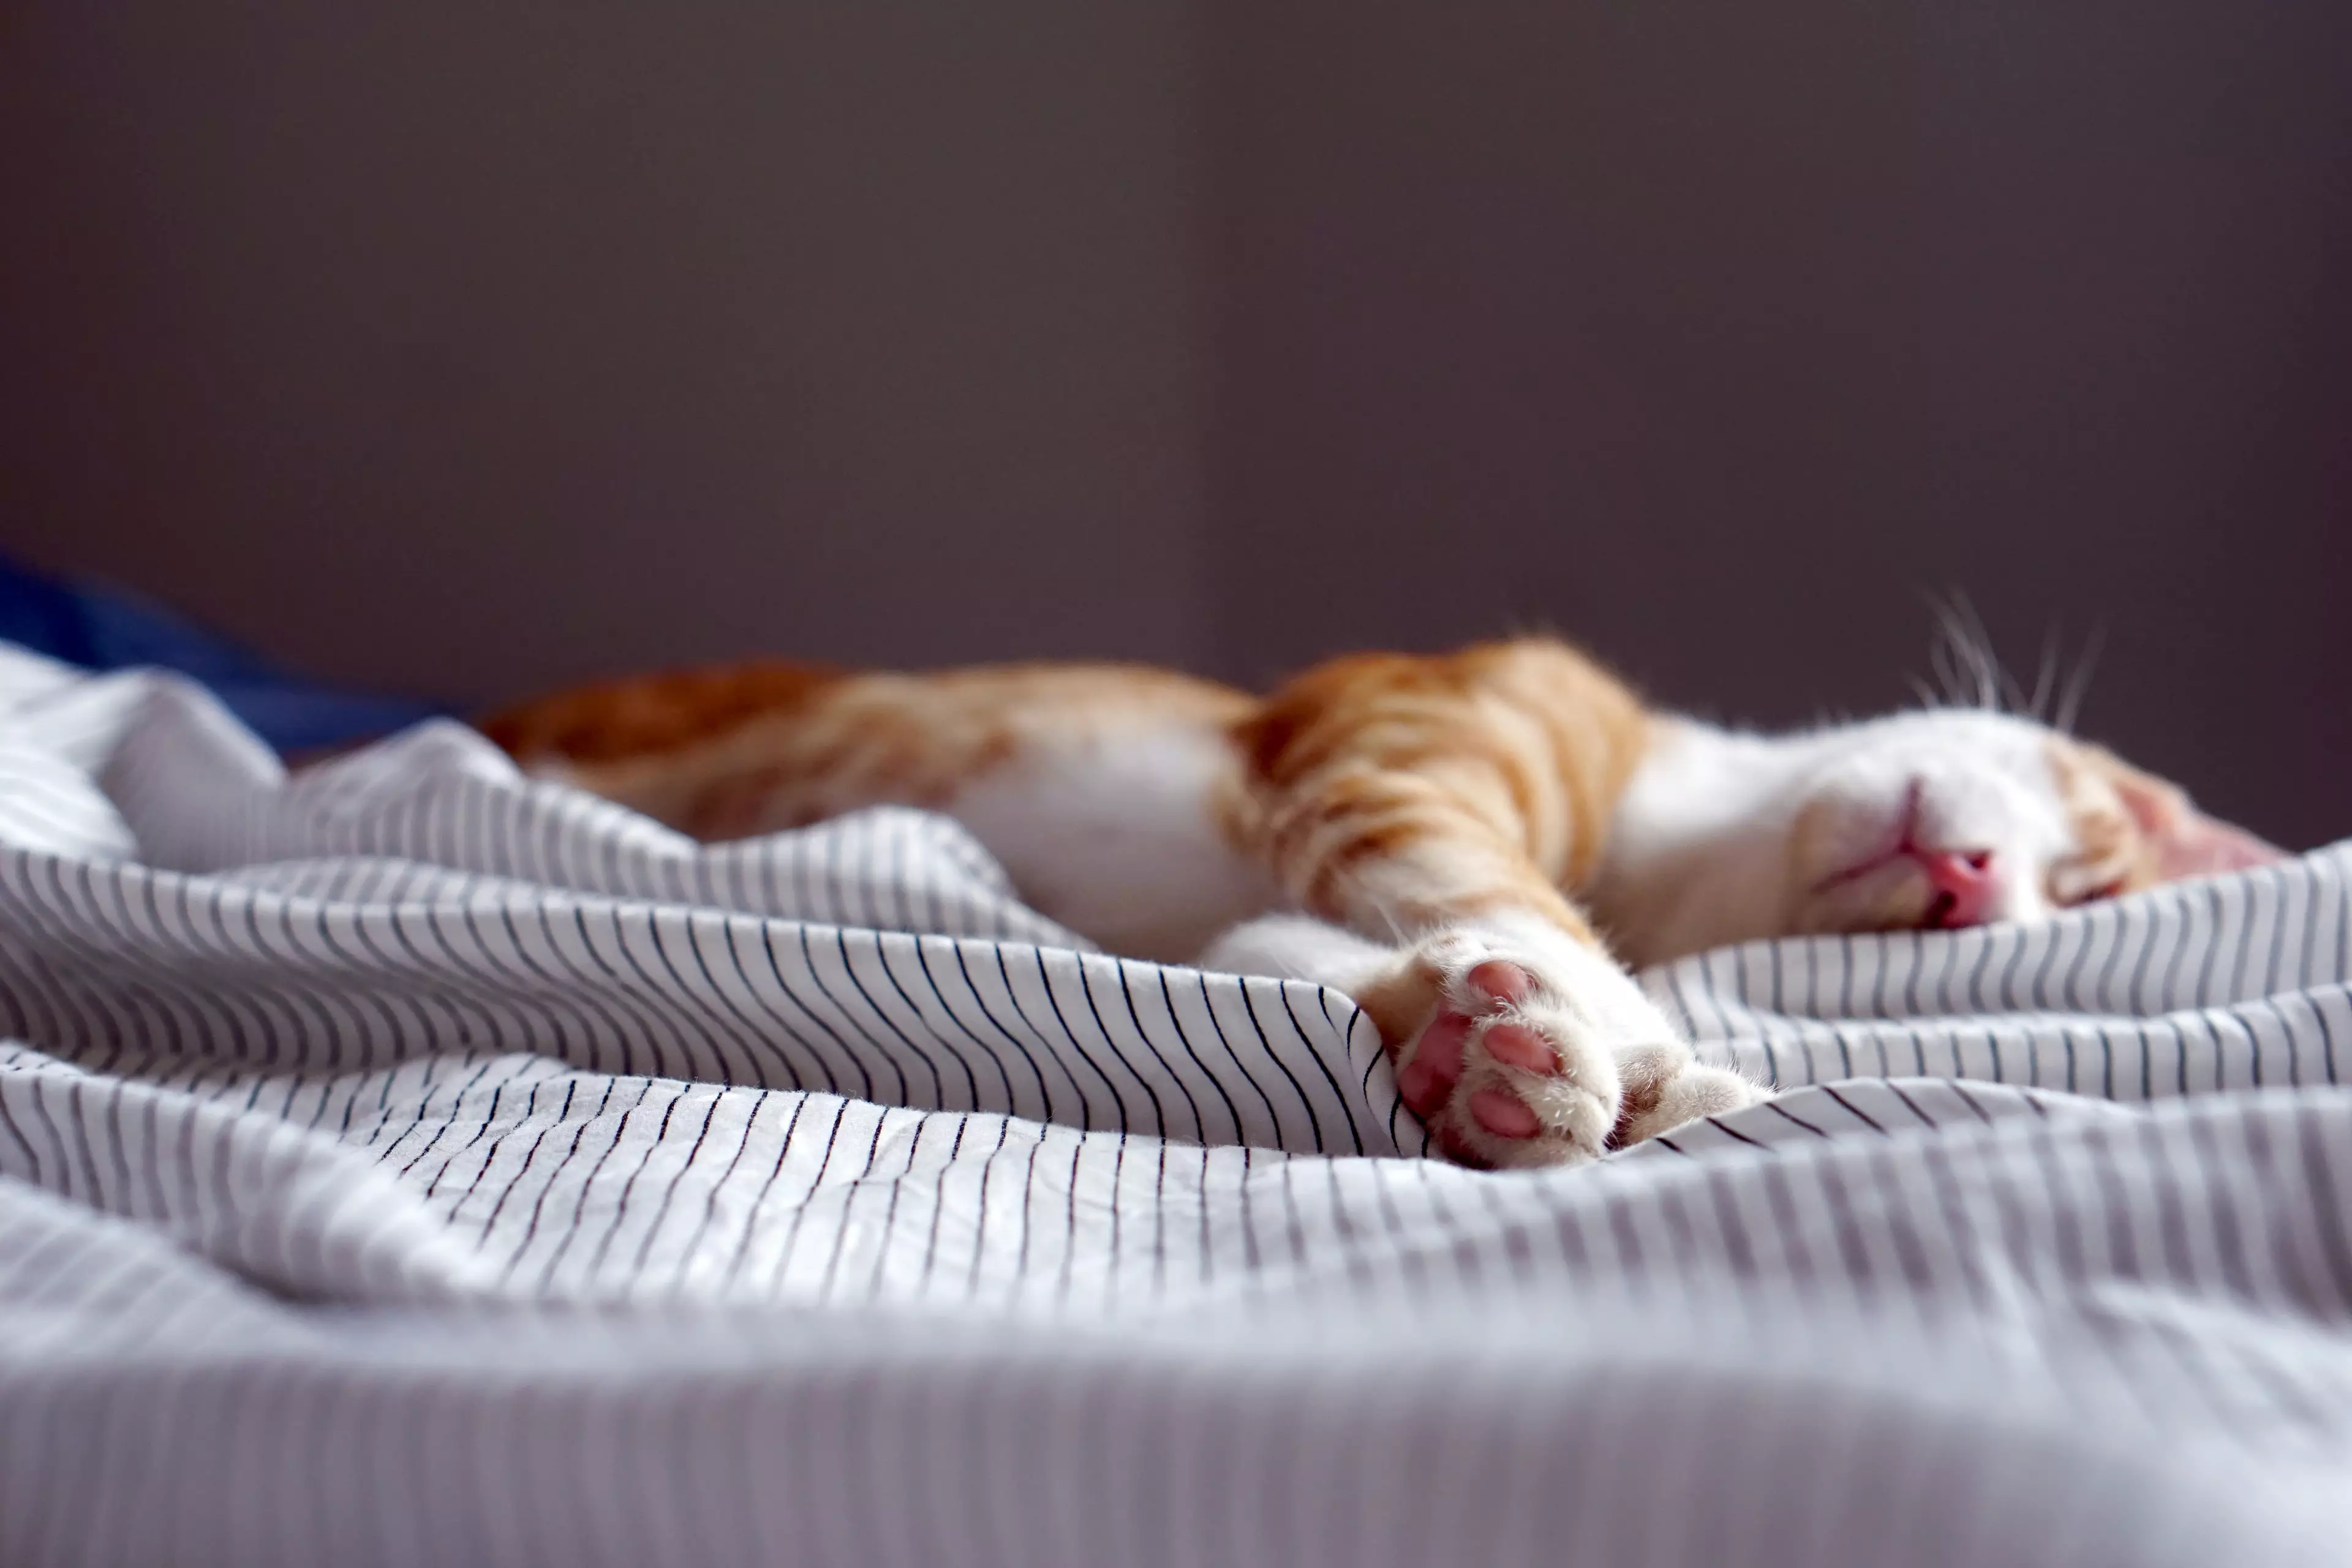 According to research, needing a nap could be down to genetics (